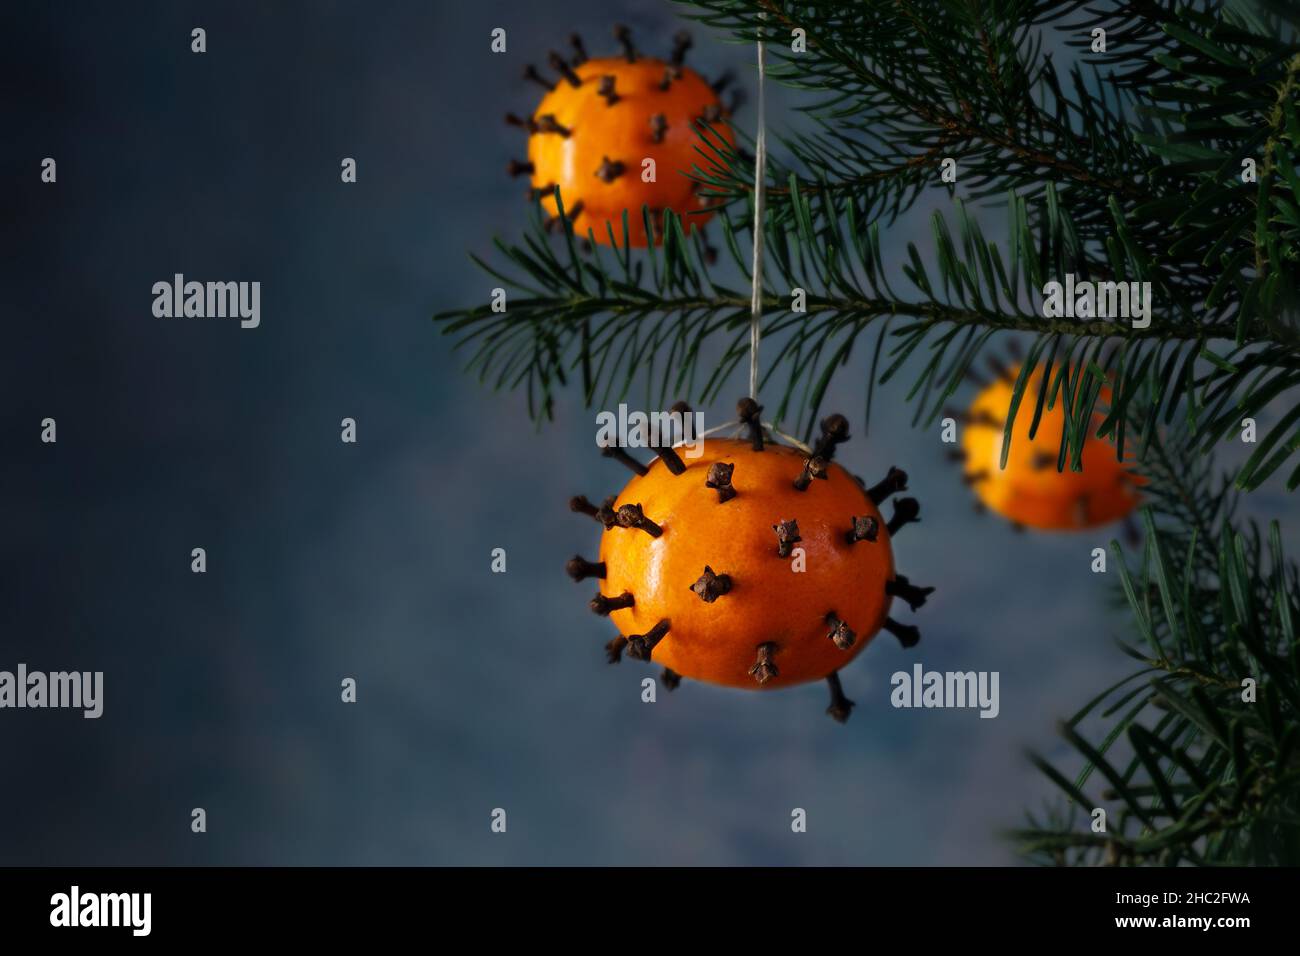 Tangerines with cloves as coronavirus omicron variant symbol hanging on a fir tree as Christmas decoration, holiday with covid-19 pandemic, dark backg Stock Photo